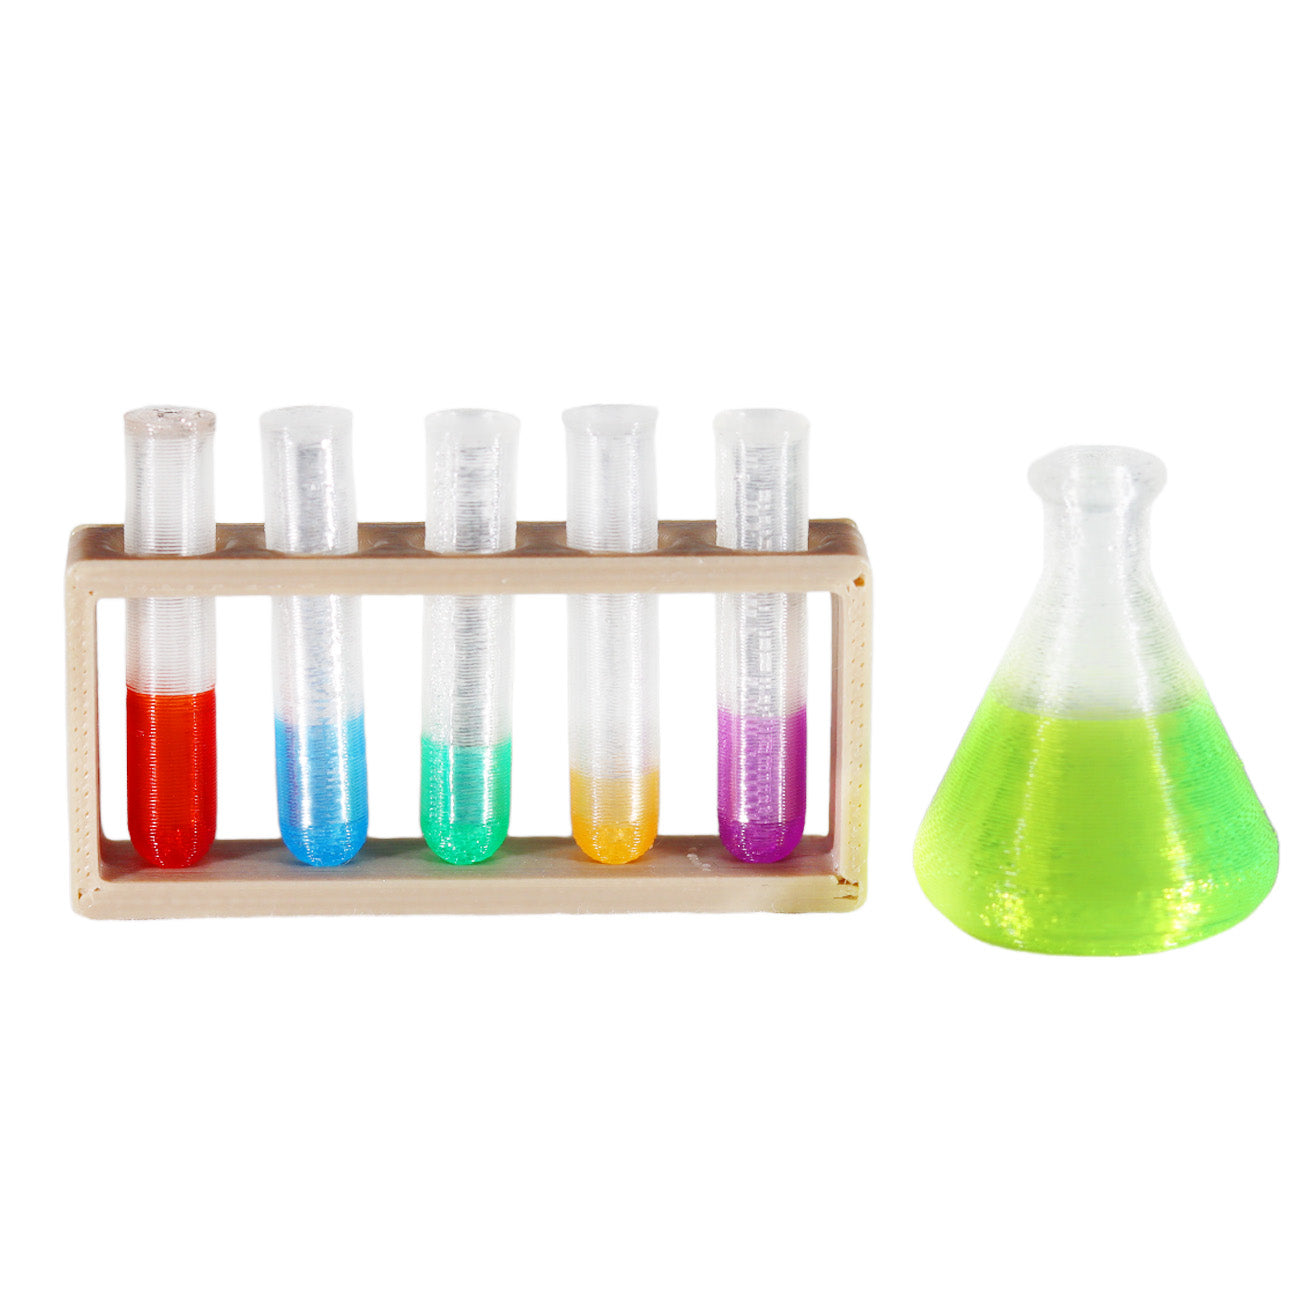 Miniature chemistry set with beaker and colourful test tube